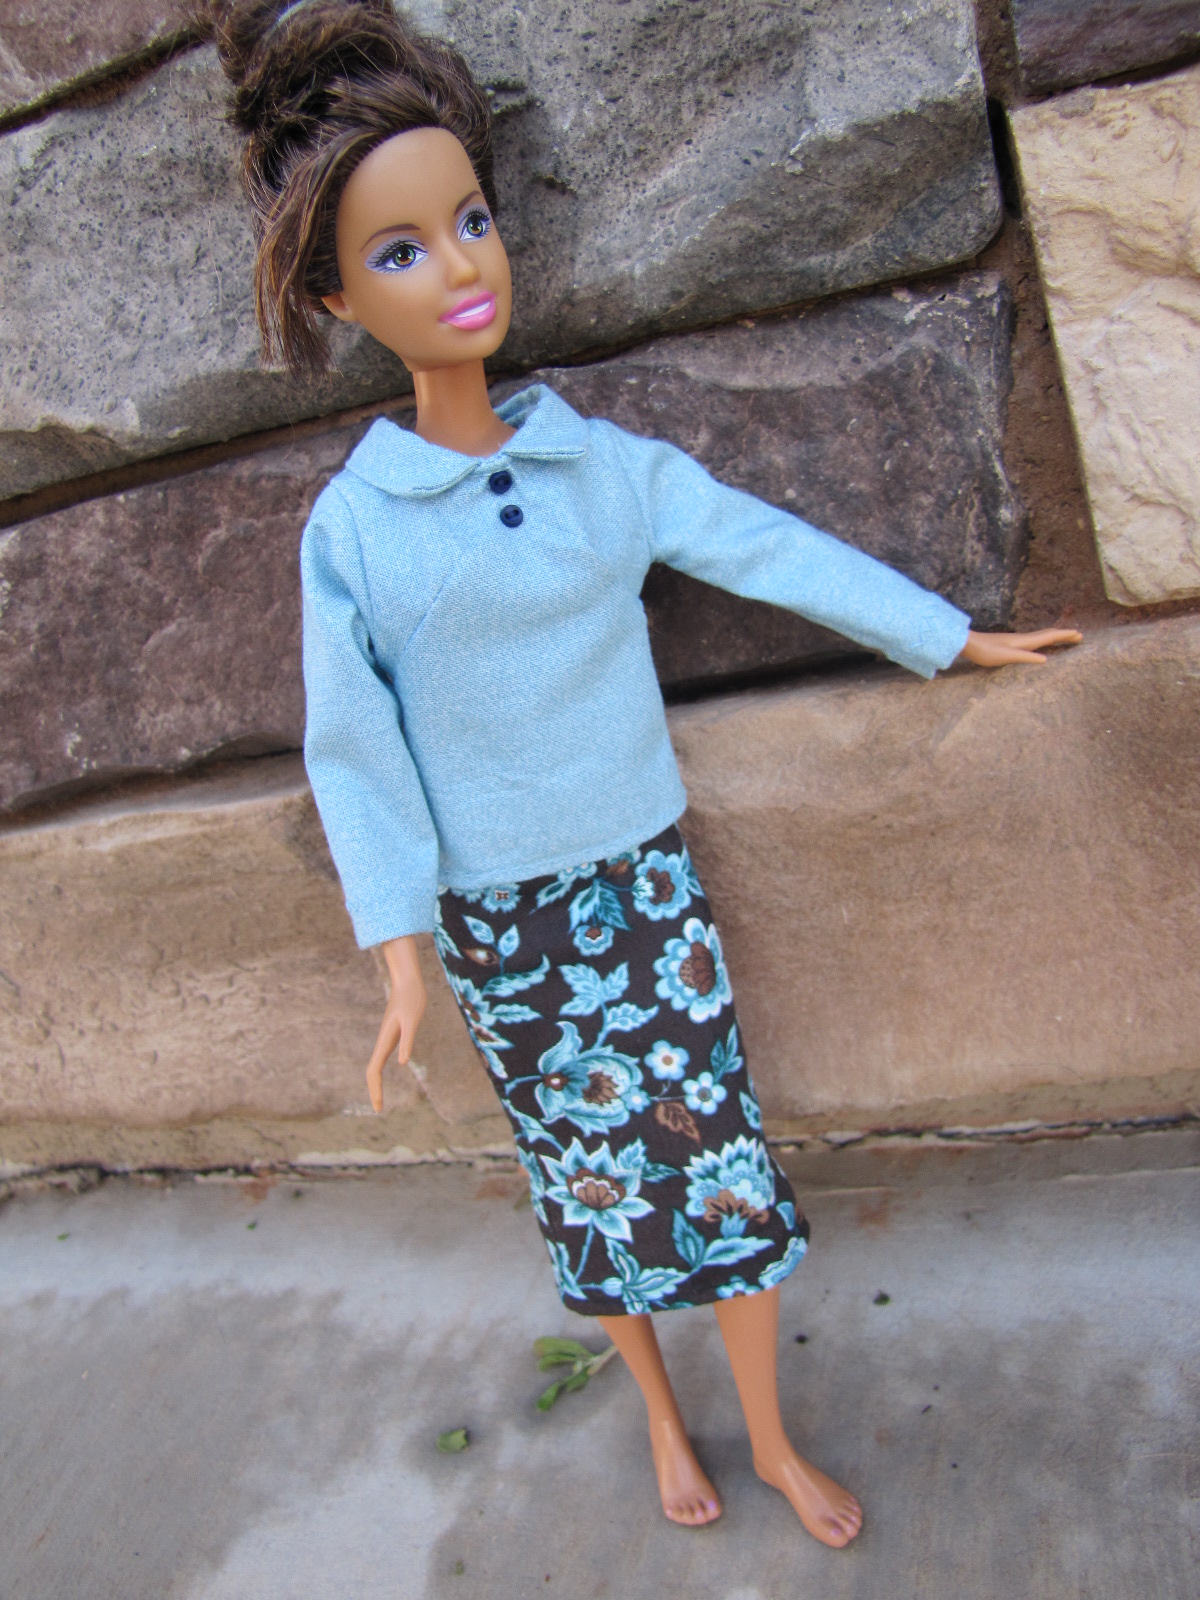 Modest Barbie Style: July 2010